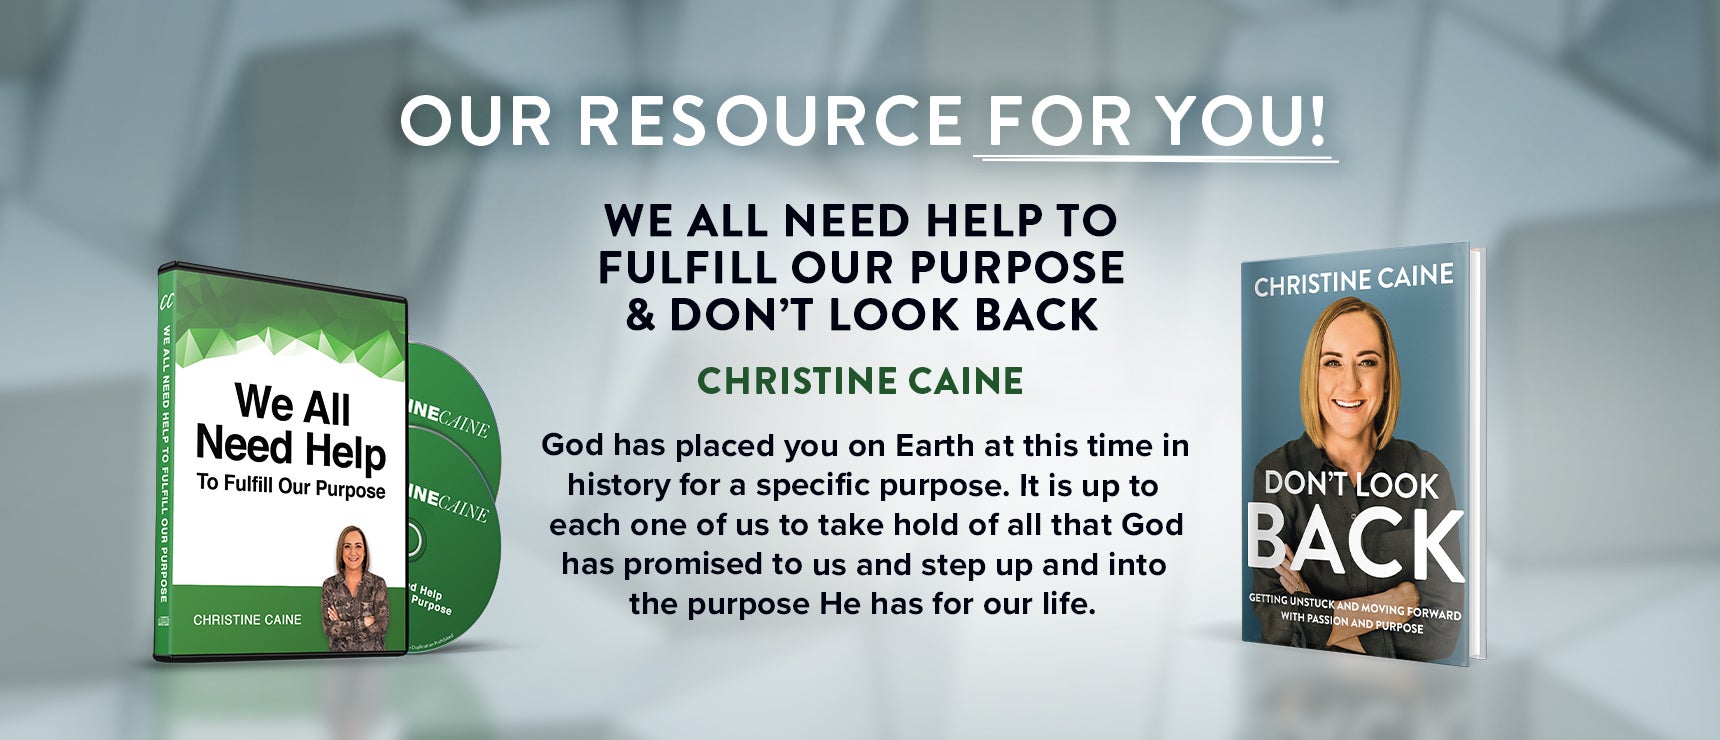 We All Need Help to Fulfill Our Purpose + Don't Look Back by Christine Caine on TBN